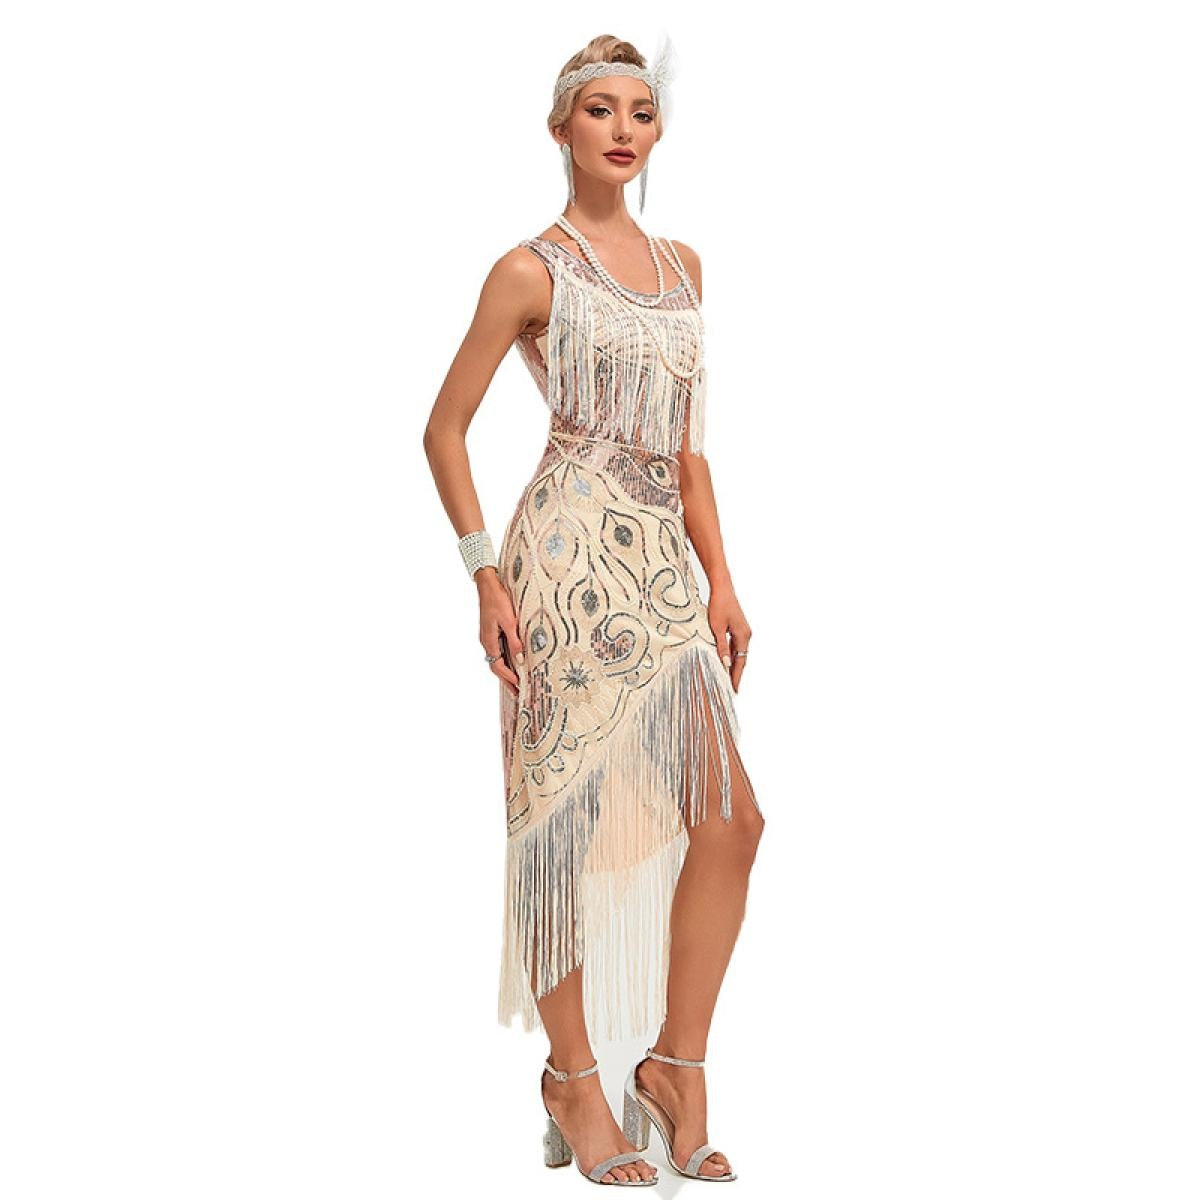 New Arrival 1920s Vintage Great Gatsby Party Flapper Dress Sleeveless Sequins Tassel Dresses Cocktail Prom Size XS-3XL Long Skirt